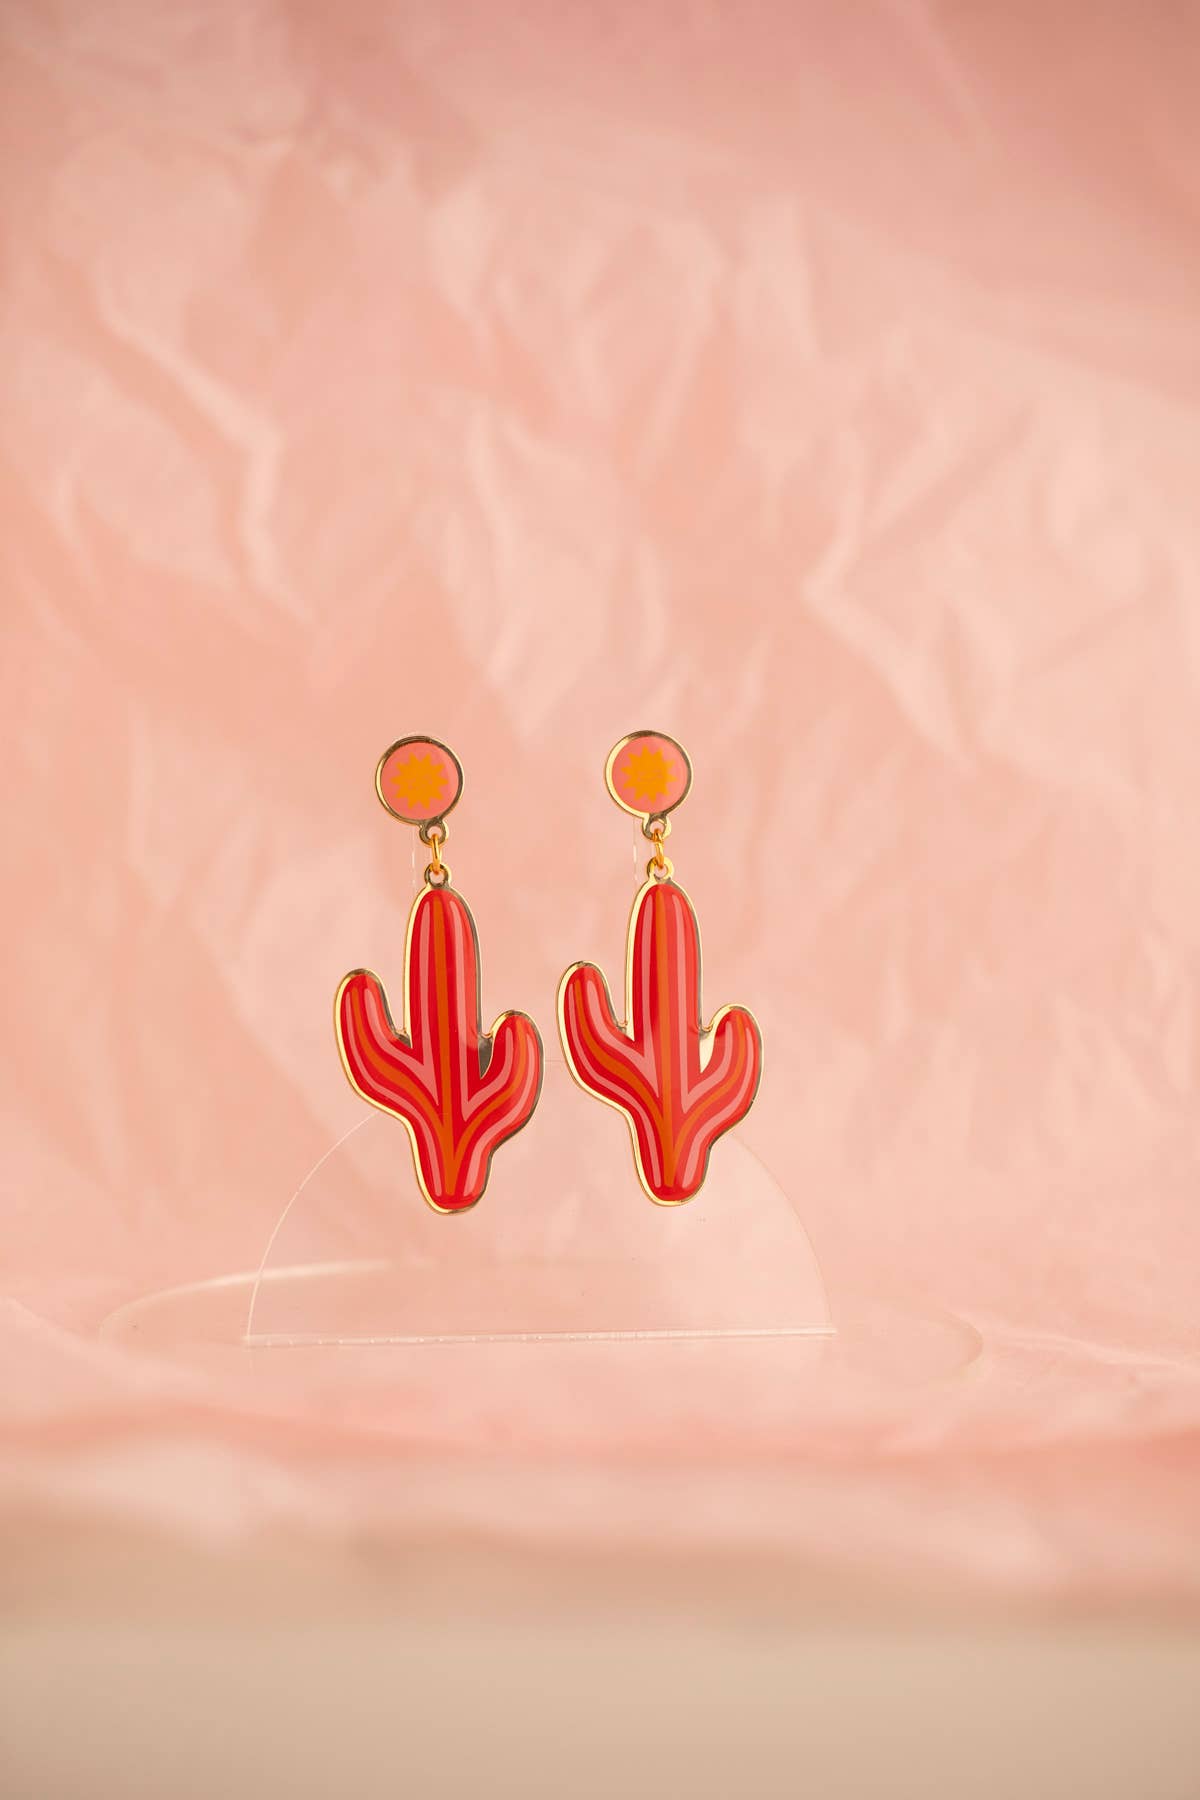 Cactus Earrings with Gabby Zapata: Hook